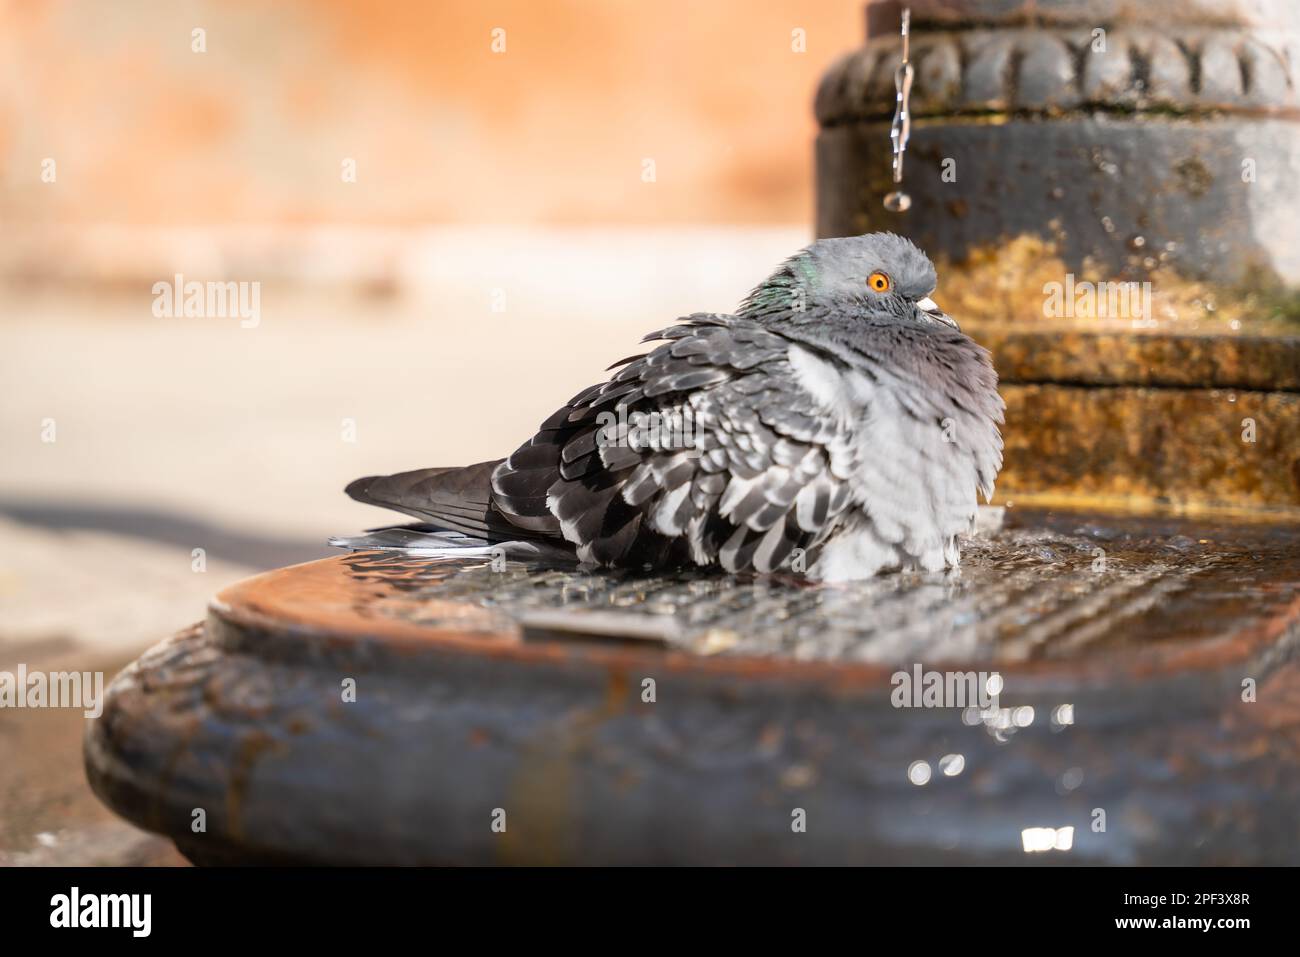 Pigeons bathing in water at Venice. Pigeon bathe in spouting water of fountain at Italy. Stock Photo